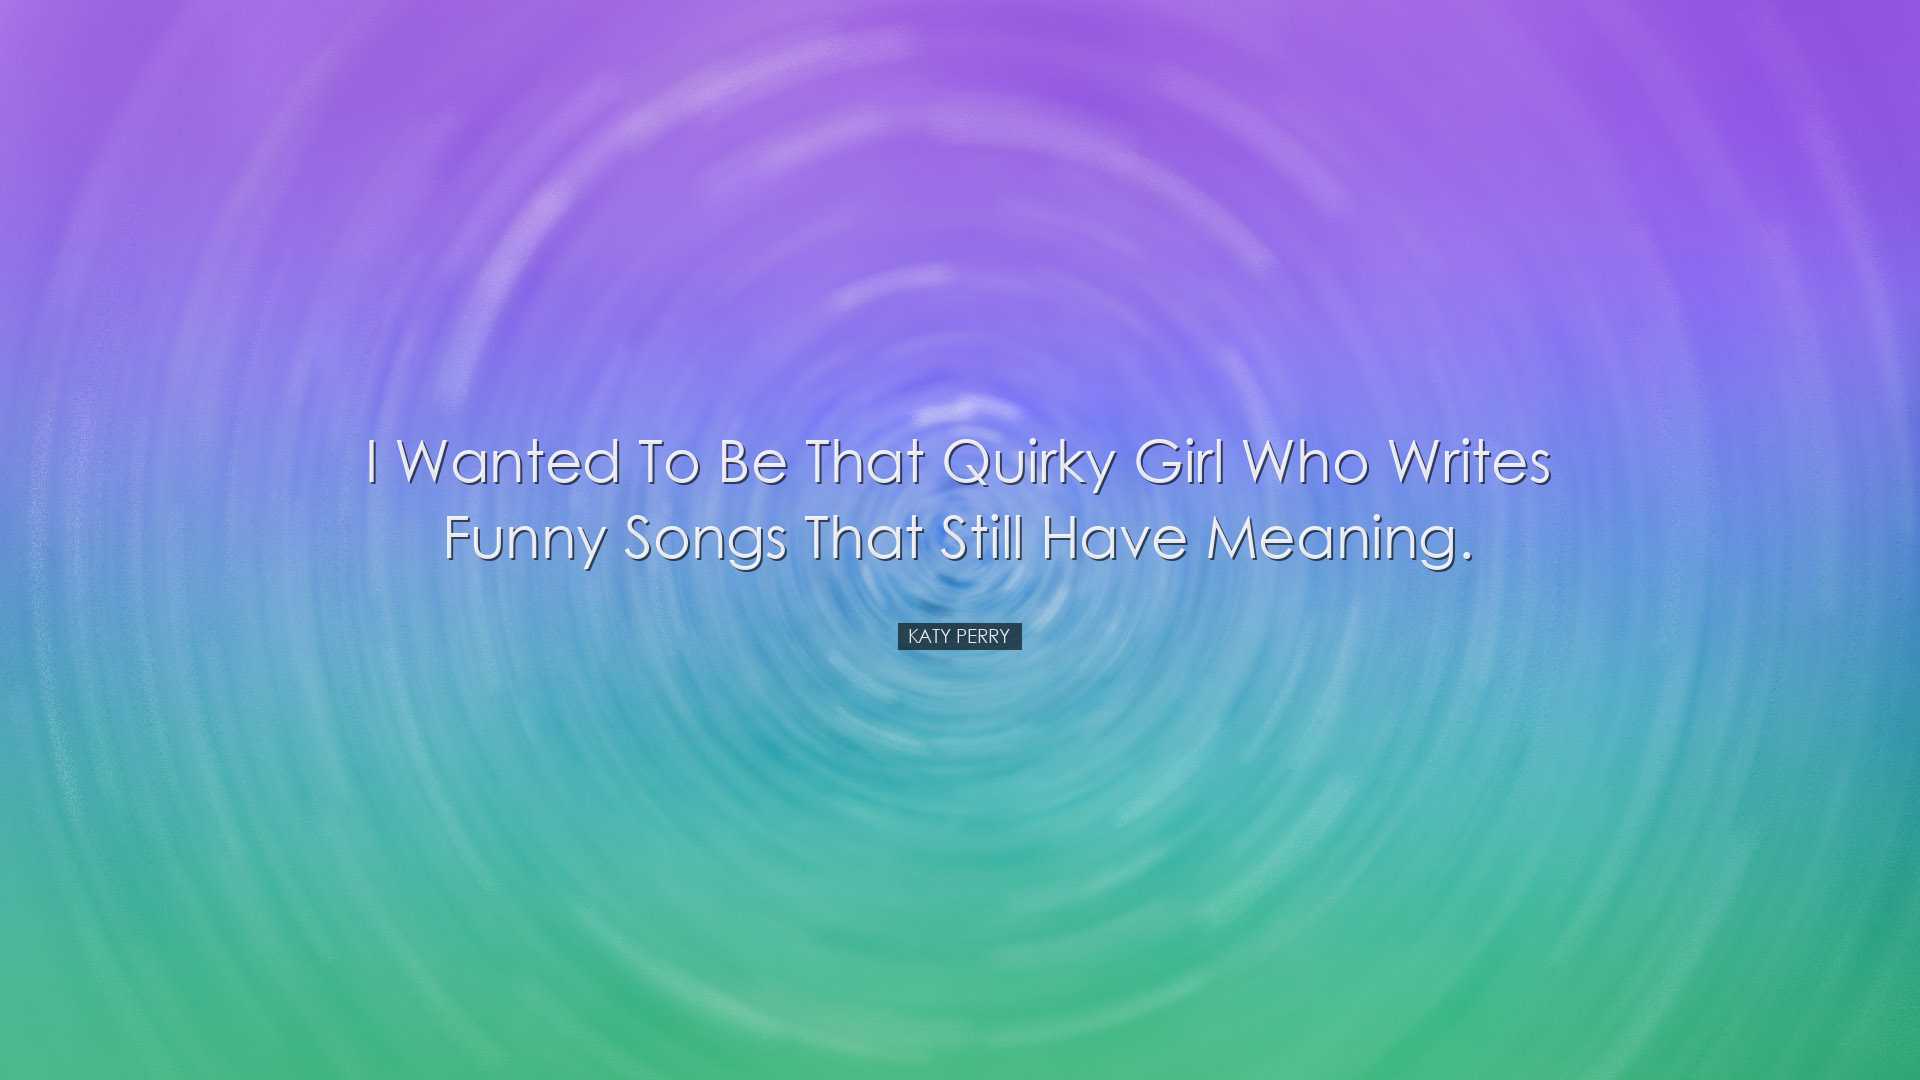 I wanted to be that quirky girl who writes funny songs that still